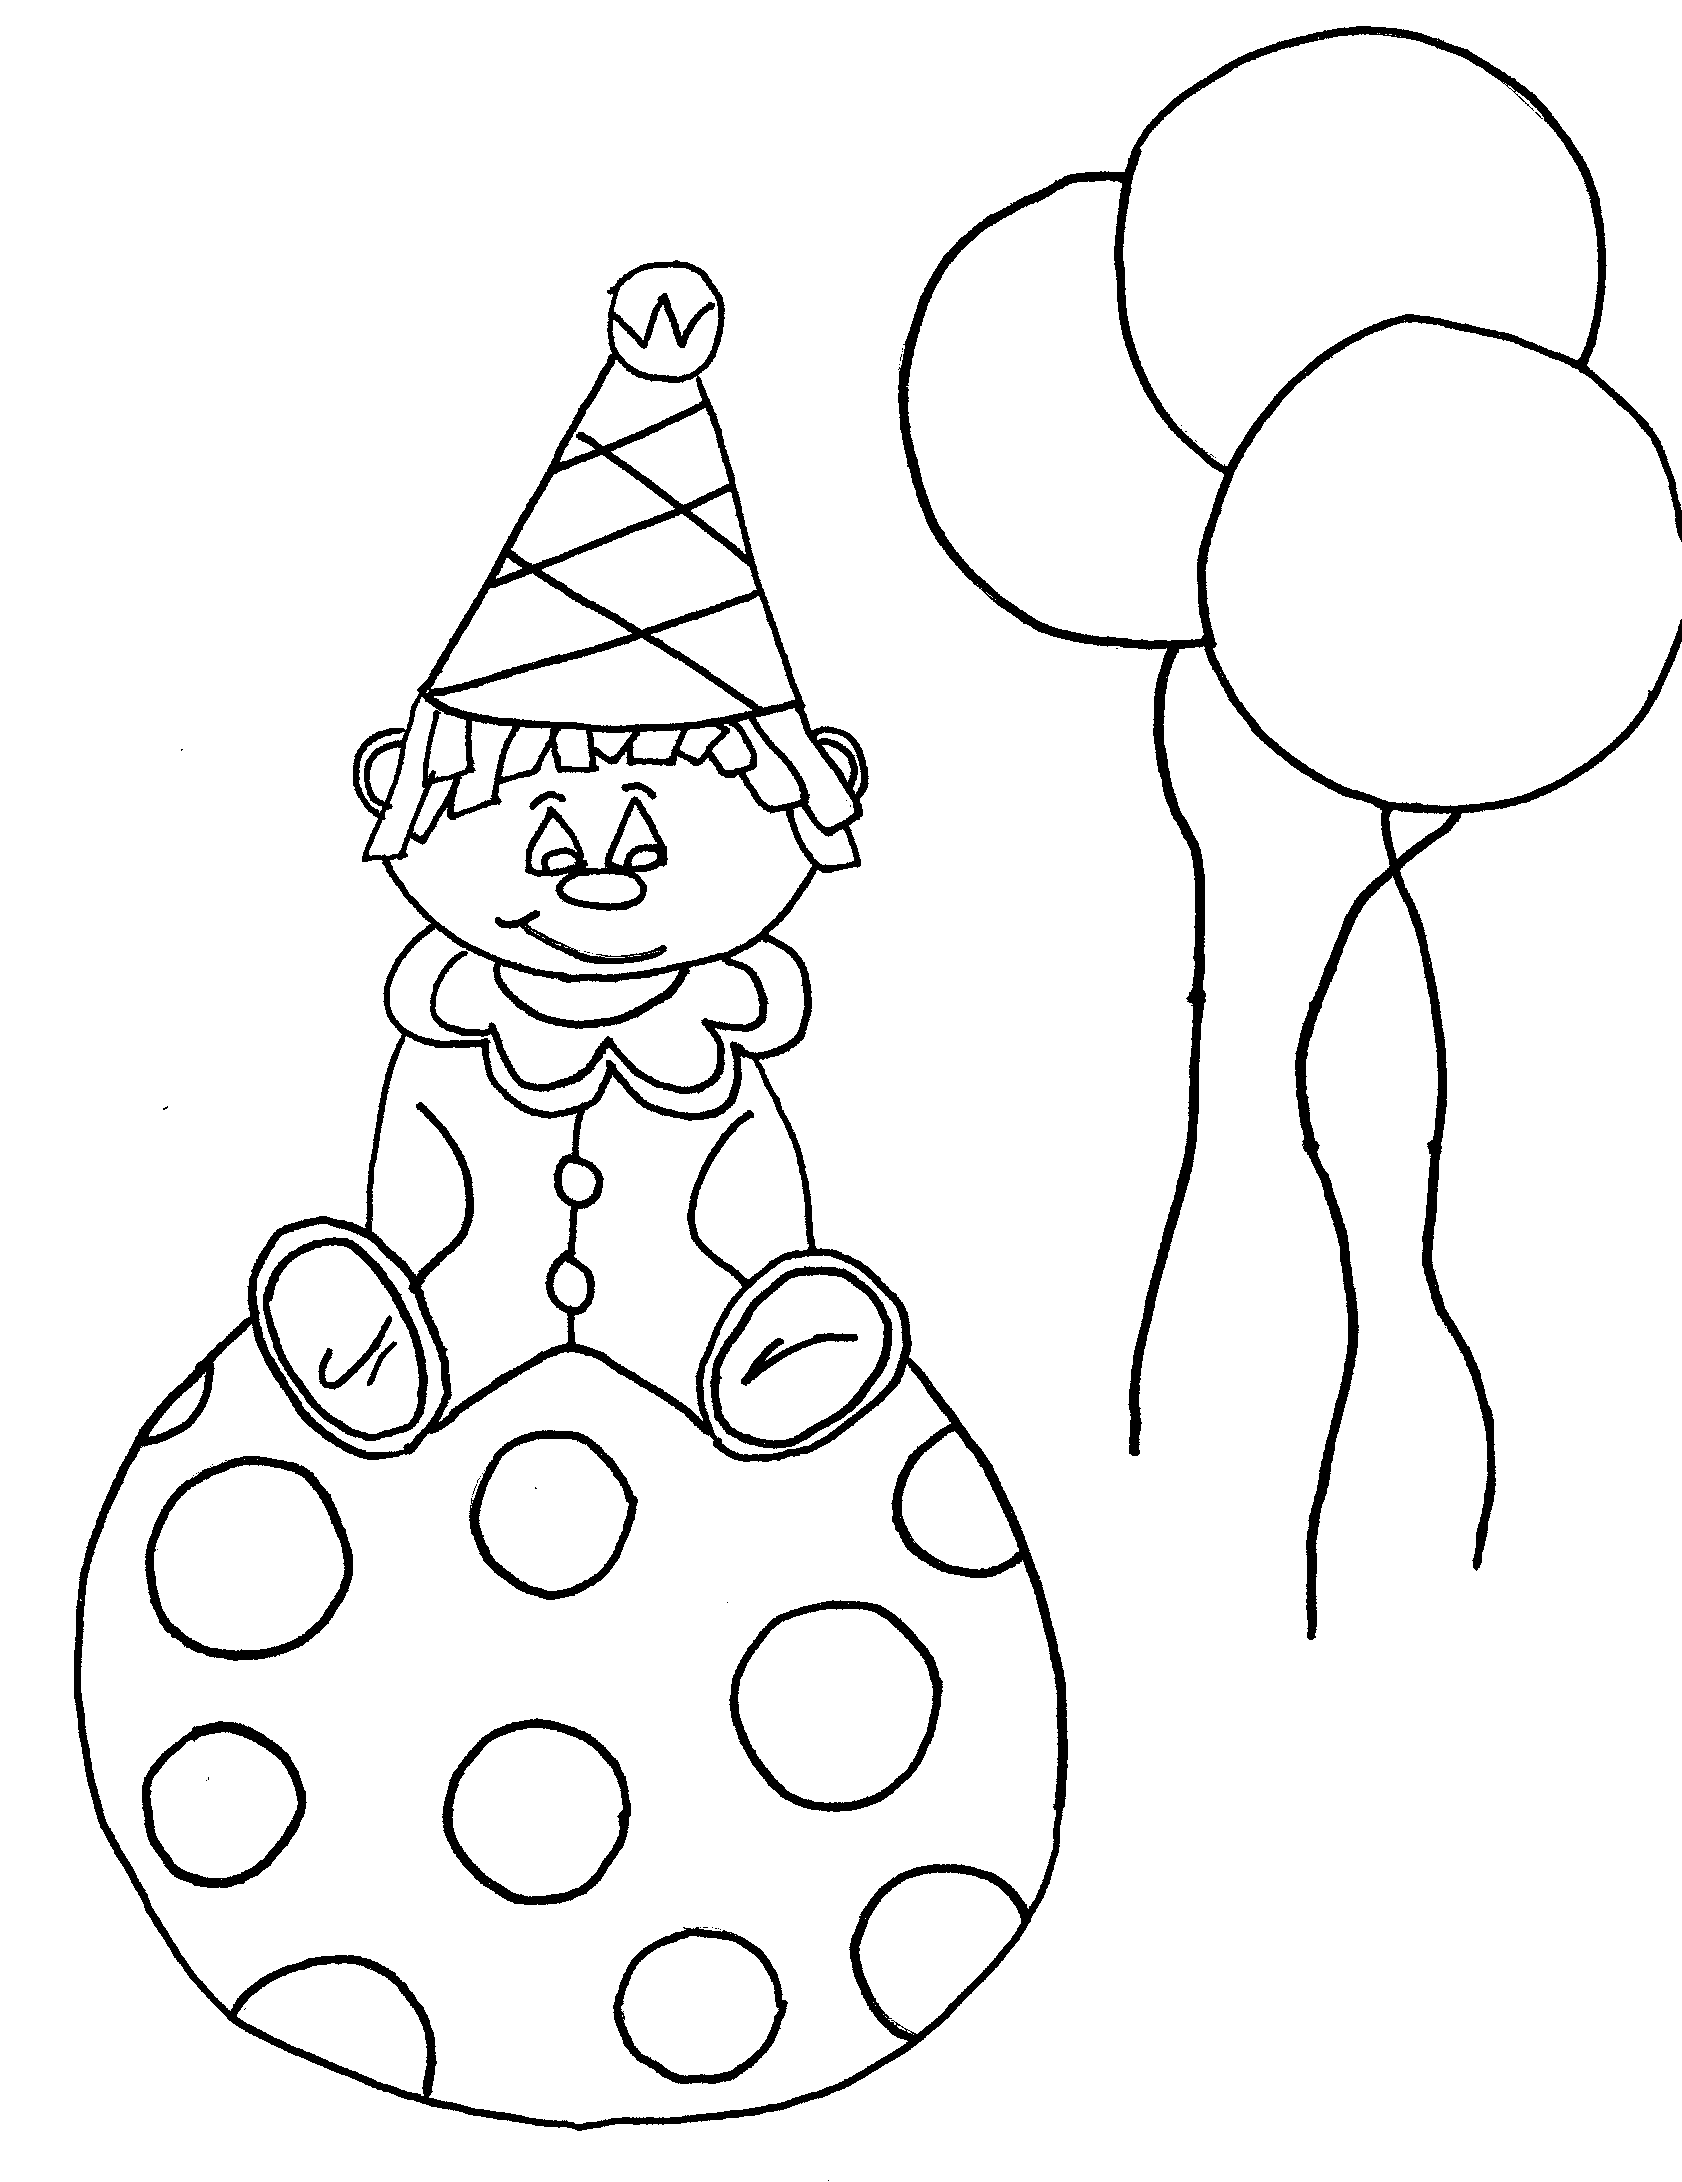 Clown Coloring Sheets Coloring Pages